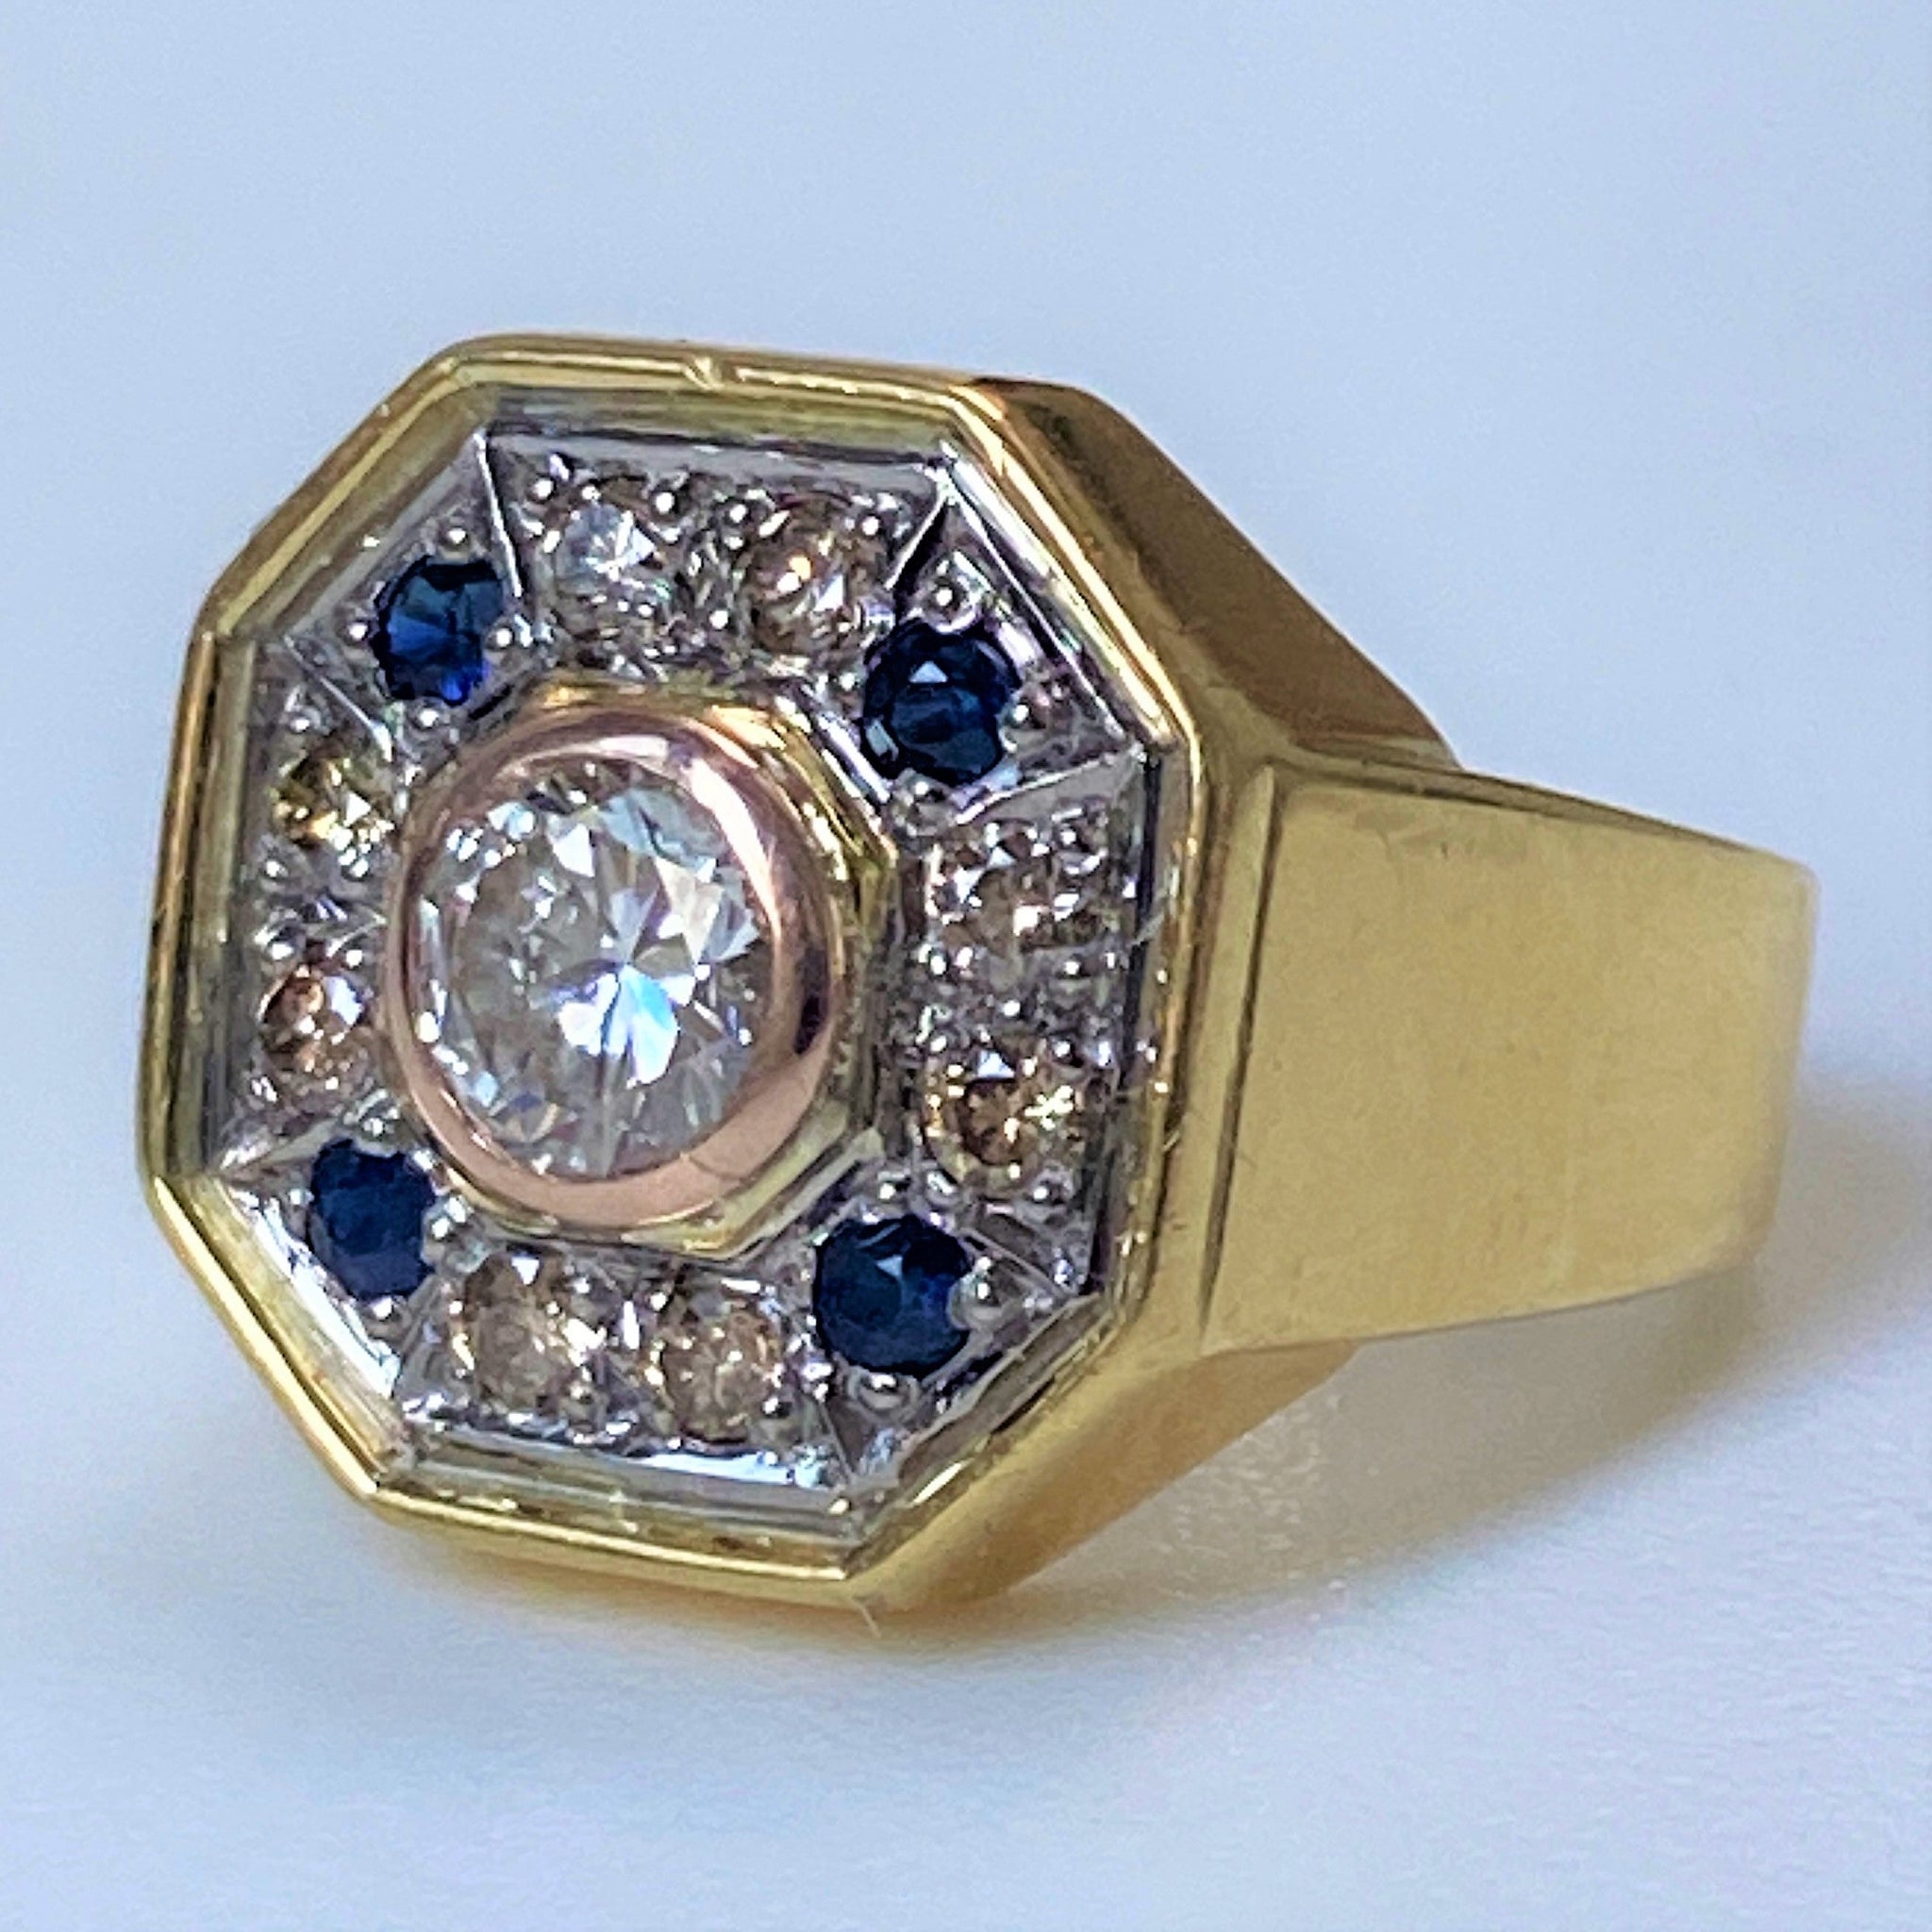 Vintage 18ct Gold, Diamond and Sapphire Ring